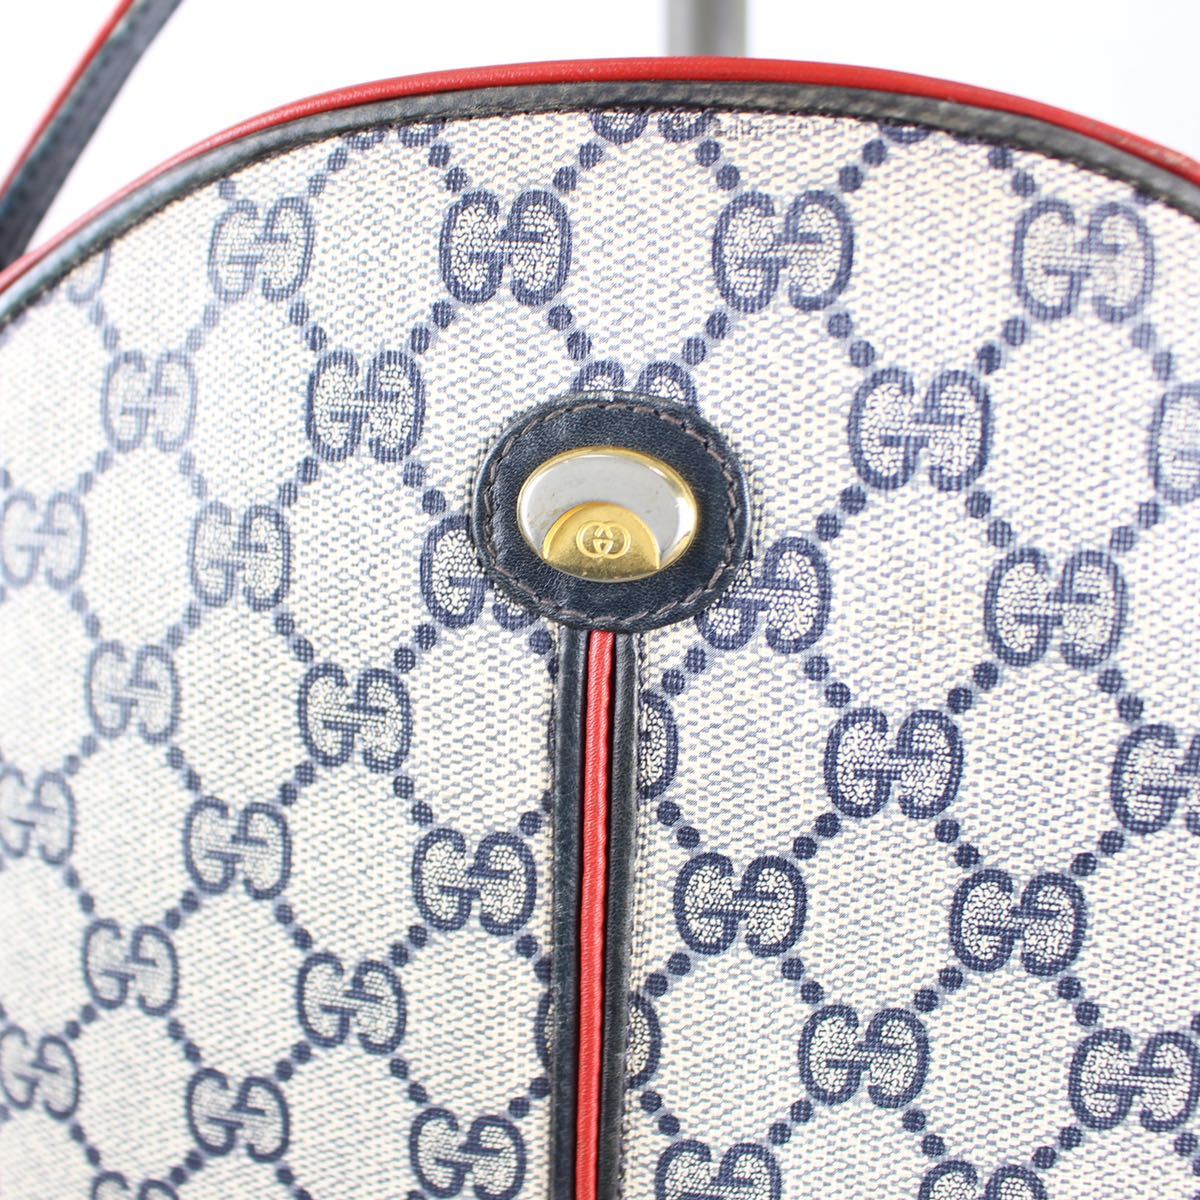 OLD GUCCI GG PATTERNED SPIPING LINE LOGO SHOULDER BAG MADE IN ITALY/オールドグッチGG柄パイピングラインロゴショルダーバッグ_画像2